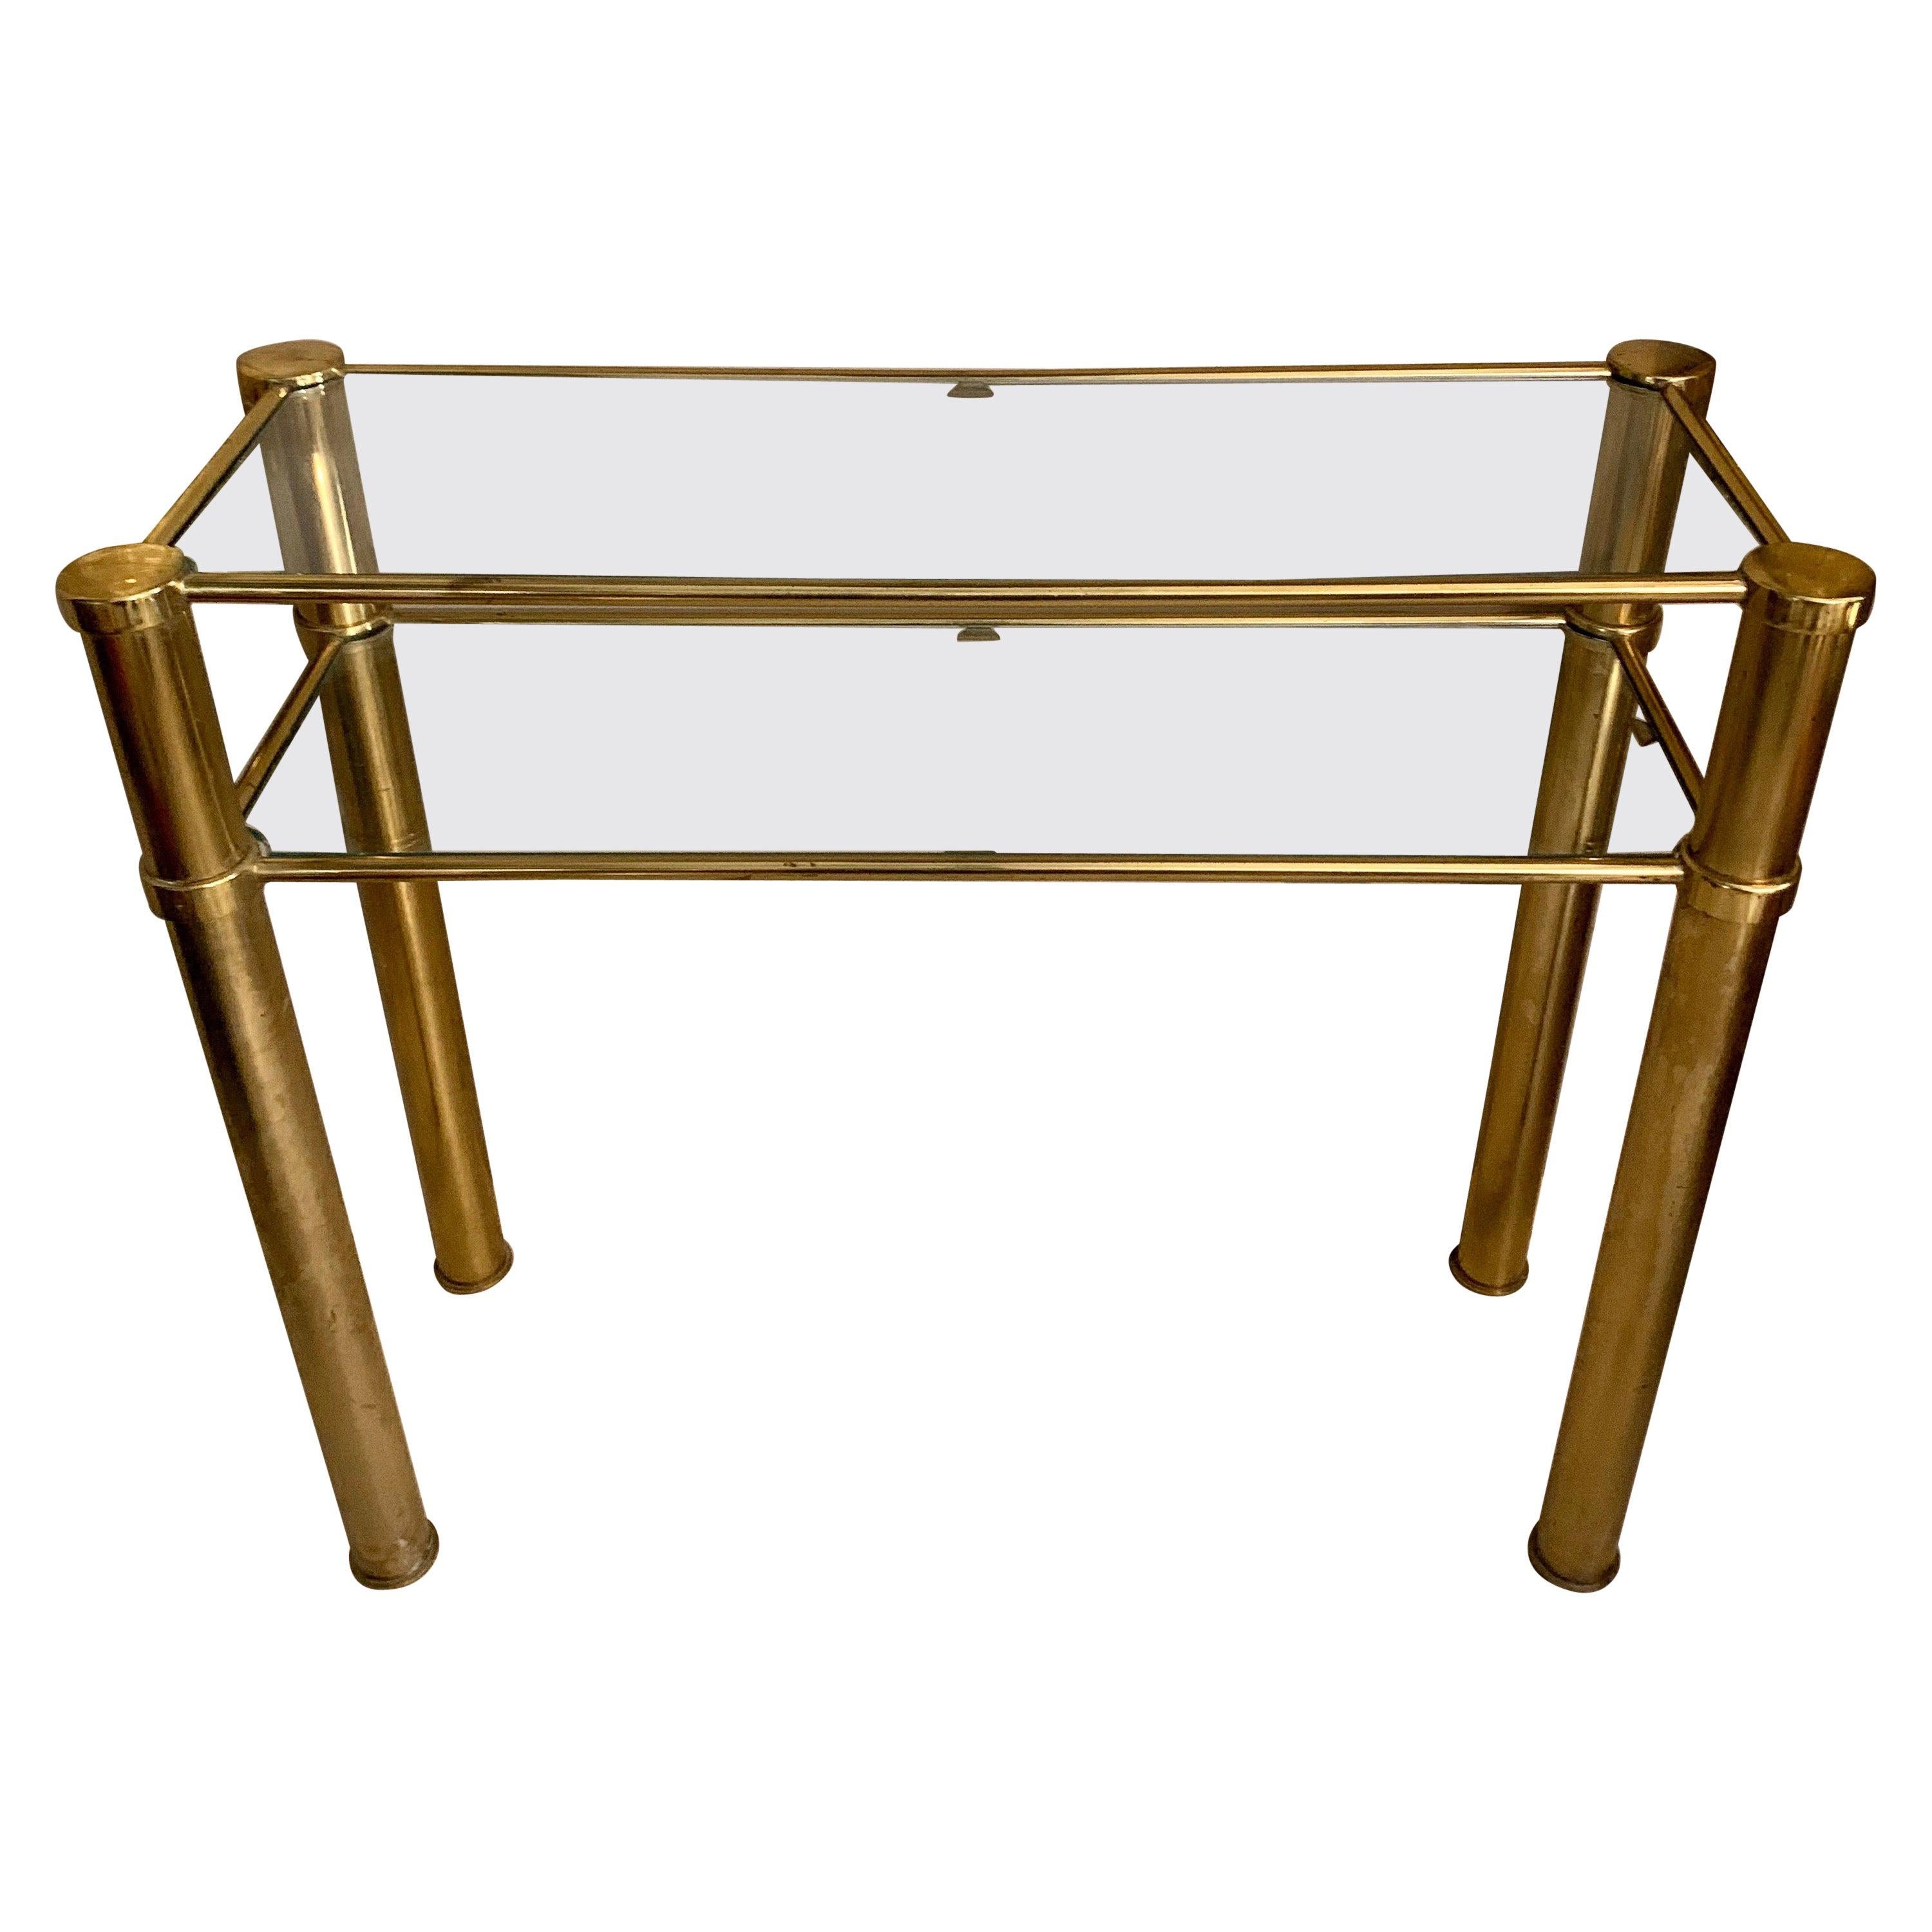 Italian Brass Console with Double Crystal Shelves, 1970